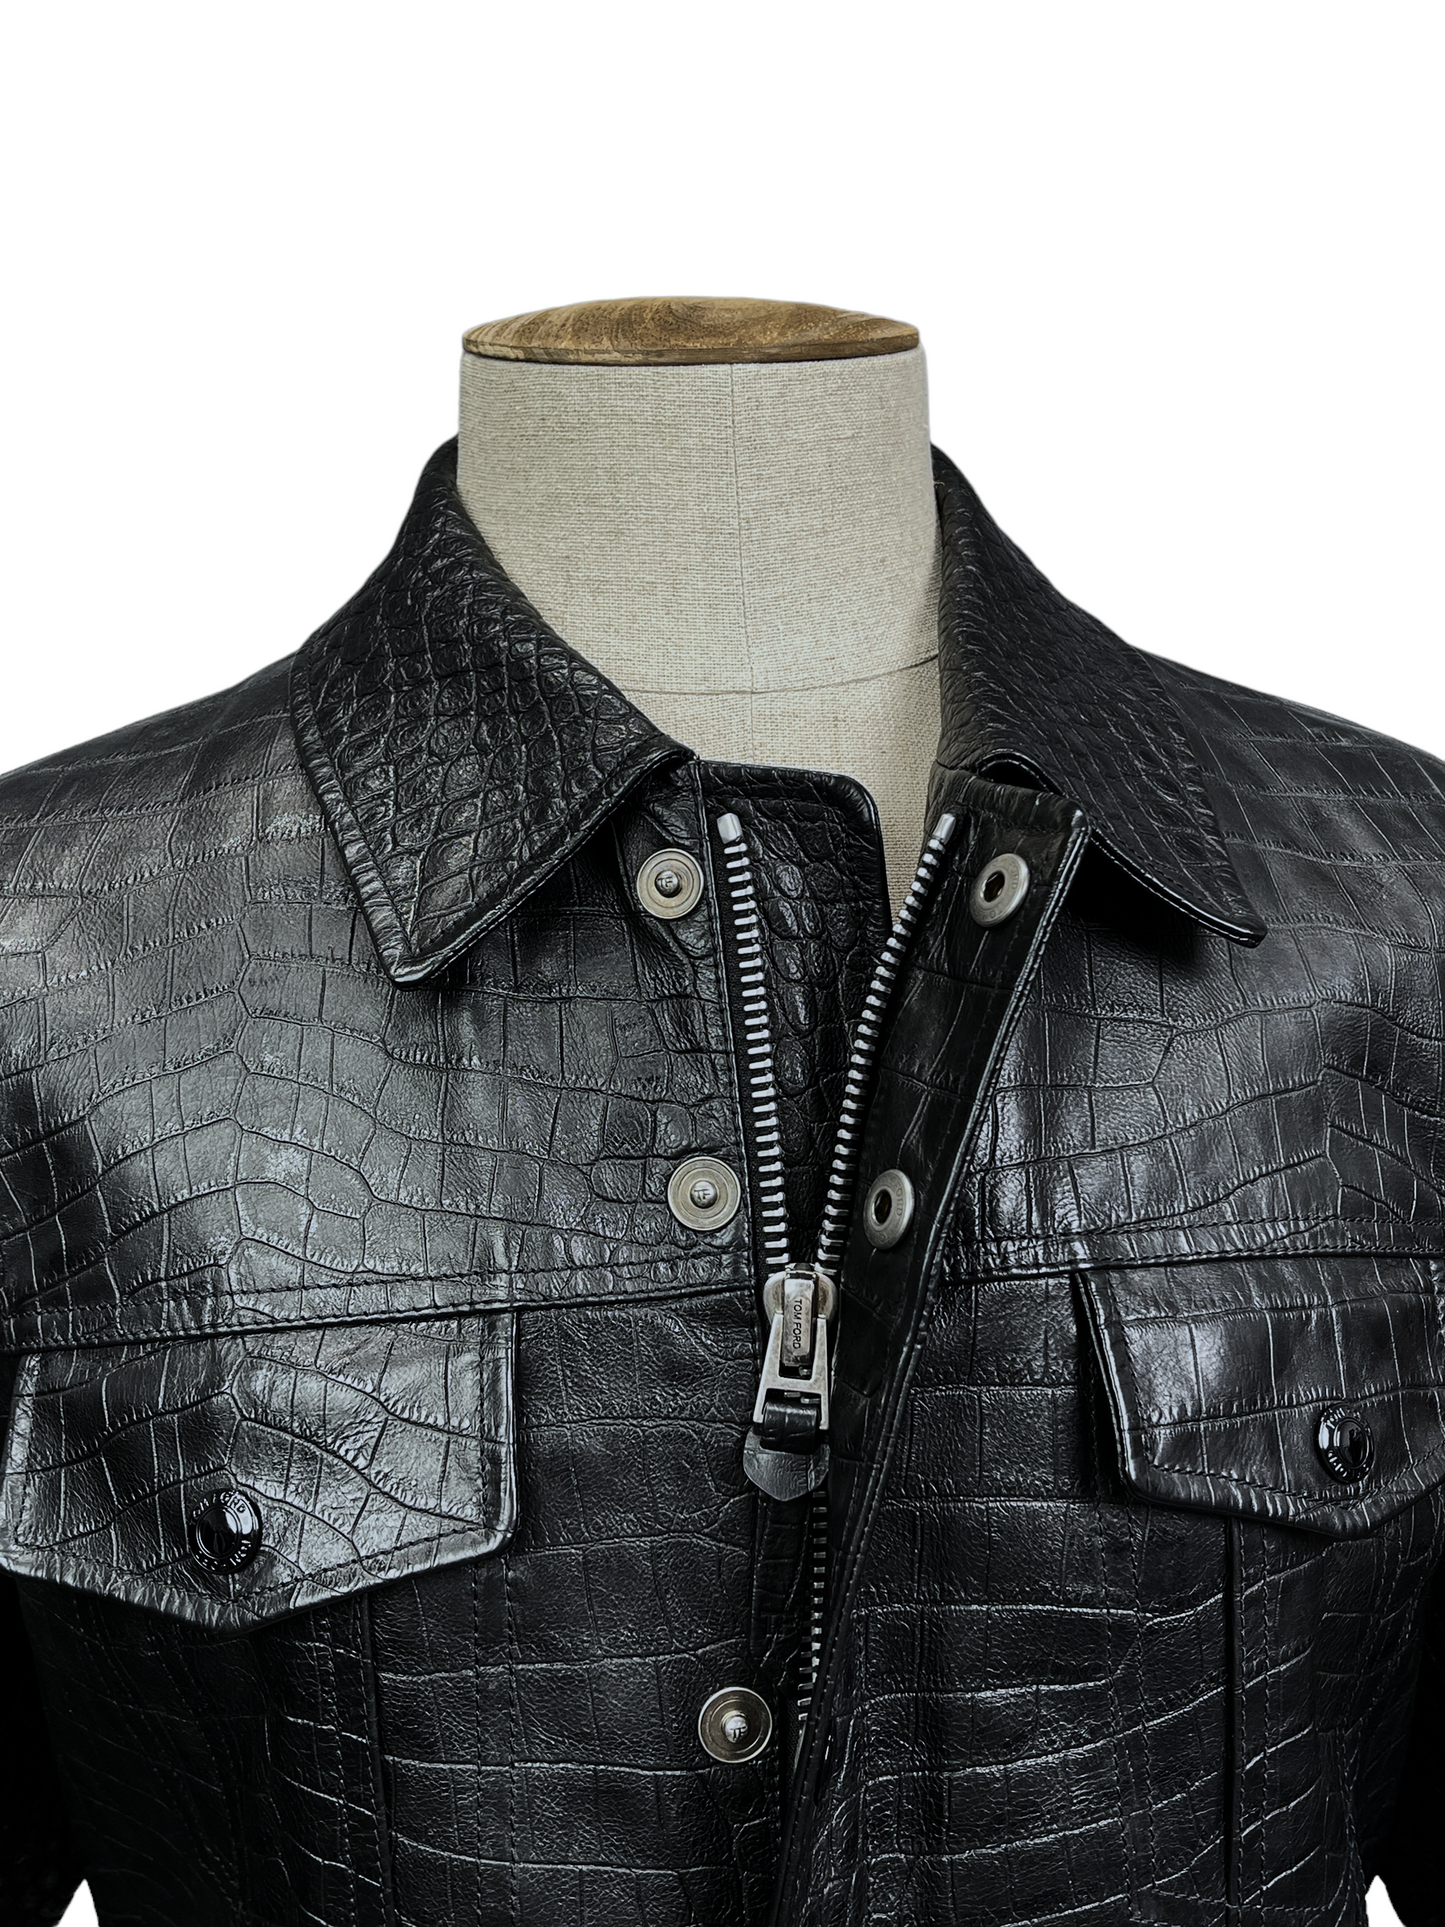 Tom Ford Black Calfskin Leather Trucker Jacket 40R — Genuine Design Luxury Consignment Calgary, Alberta, Canada New and Pre-Owned Clothing, Shoes, Accessories.